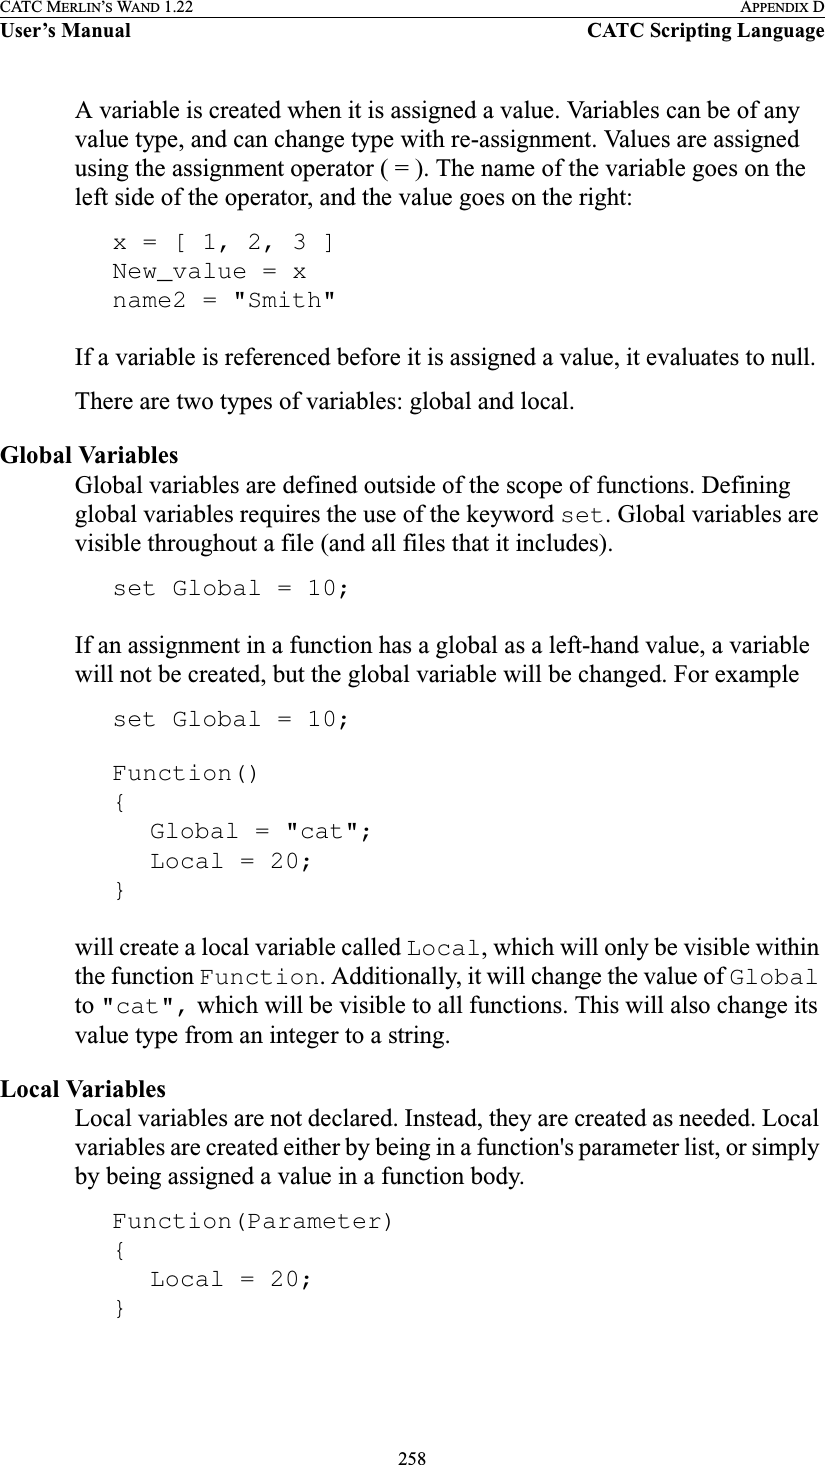 258CATC MERLIN’S WAND 1.22 APPENDIX DUser’s Manual CATC Scripting LanguageA variable is created when it is assigned a value. Variables can be of any value type, and can change type with re-assignment. Values are assigned using the assignment operator ( = ). The name of the variable goes on the left side of the operator, and the value goes on the right:x = [ 1, 2, 3 ]New_value = xname2 = &quot;Smith&quot;If a variable is referenced before it is assigned a value, it evaluates to null.There are two types of variables: global and local.Global VariablesGlobal variables are defined outside of the scope of functions. Defining global variables requires the use of the keyword set. Global variables are visible throughout a file (and all files that it includes).set Global = 10;If an assignment in a function has a global as a left-hand value, a variable will not be created, but the global variable will be changed. For exampleset Global = 10;Function(){Global = &quot;cat&quot;;Local = 20;}will create a local variable called Local, which will only be visible within the function Function. Additionally, it will change the value of Global to &quot;cat&quot;, which will be visible to all functions. This will also change its value type from an integer to a string.Local VariablesLocal variables are not declared. Instead, they are created as needed. Local variables are created either by being in a function&apos;s parameter list, or simply by being assigned a value in a function body. Function(Parameter){Local = 20;}